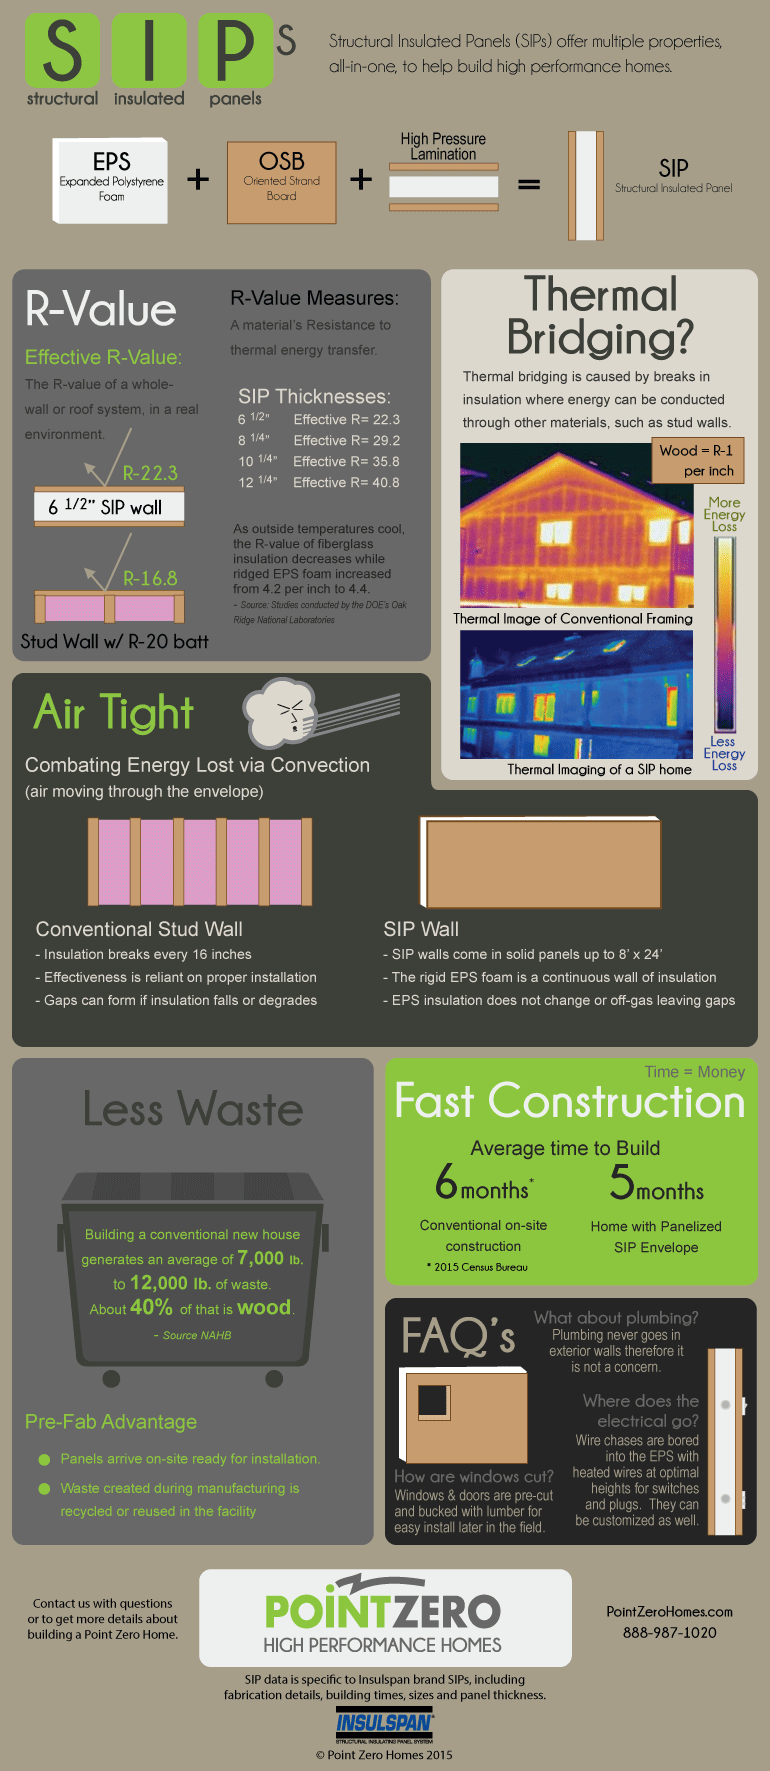 SIP - Structural Insulated Panel infographic.  Presented by Point Zero Homes